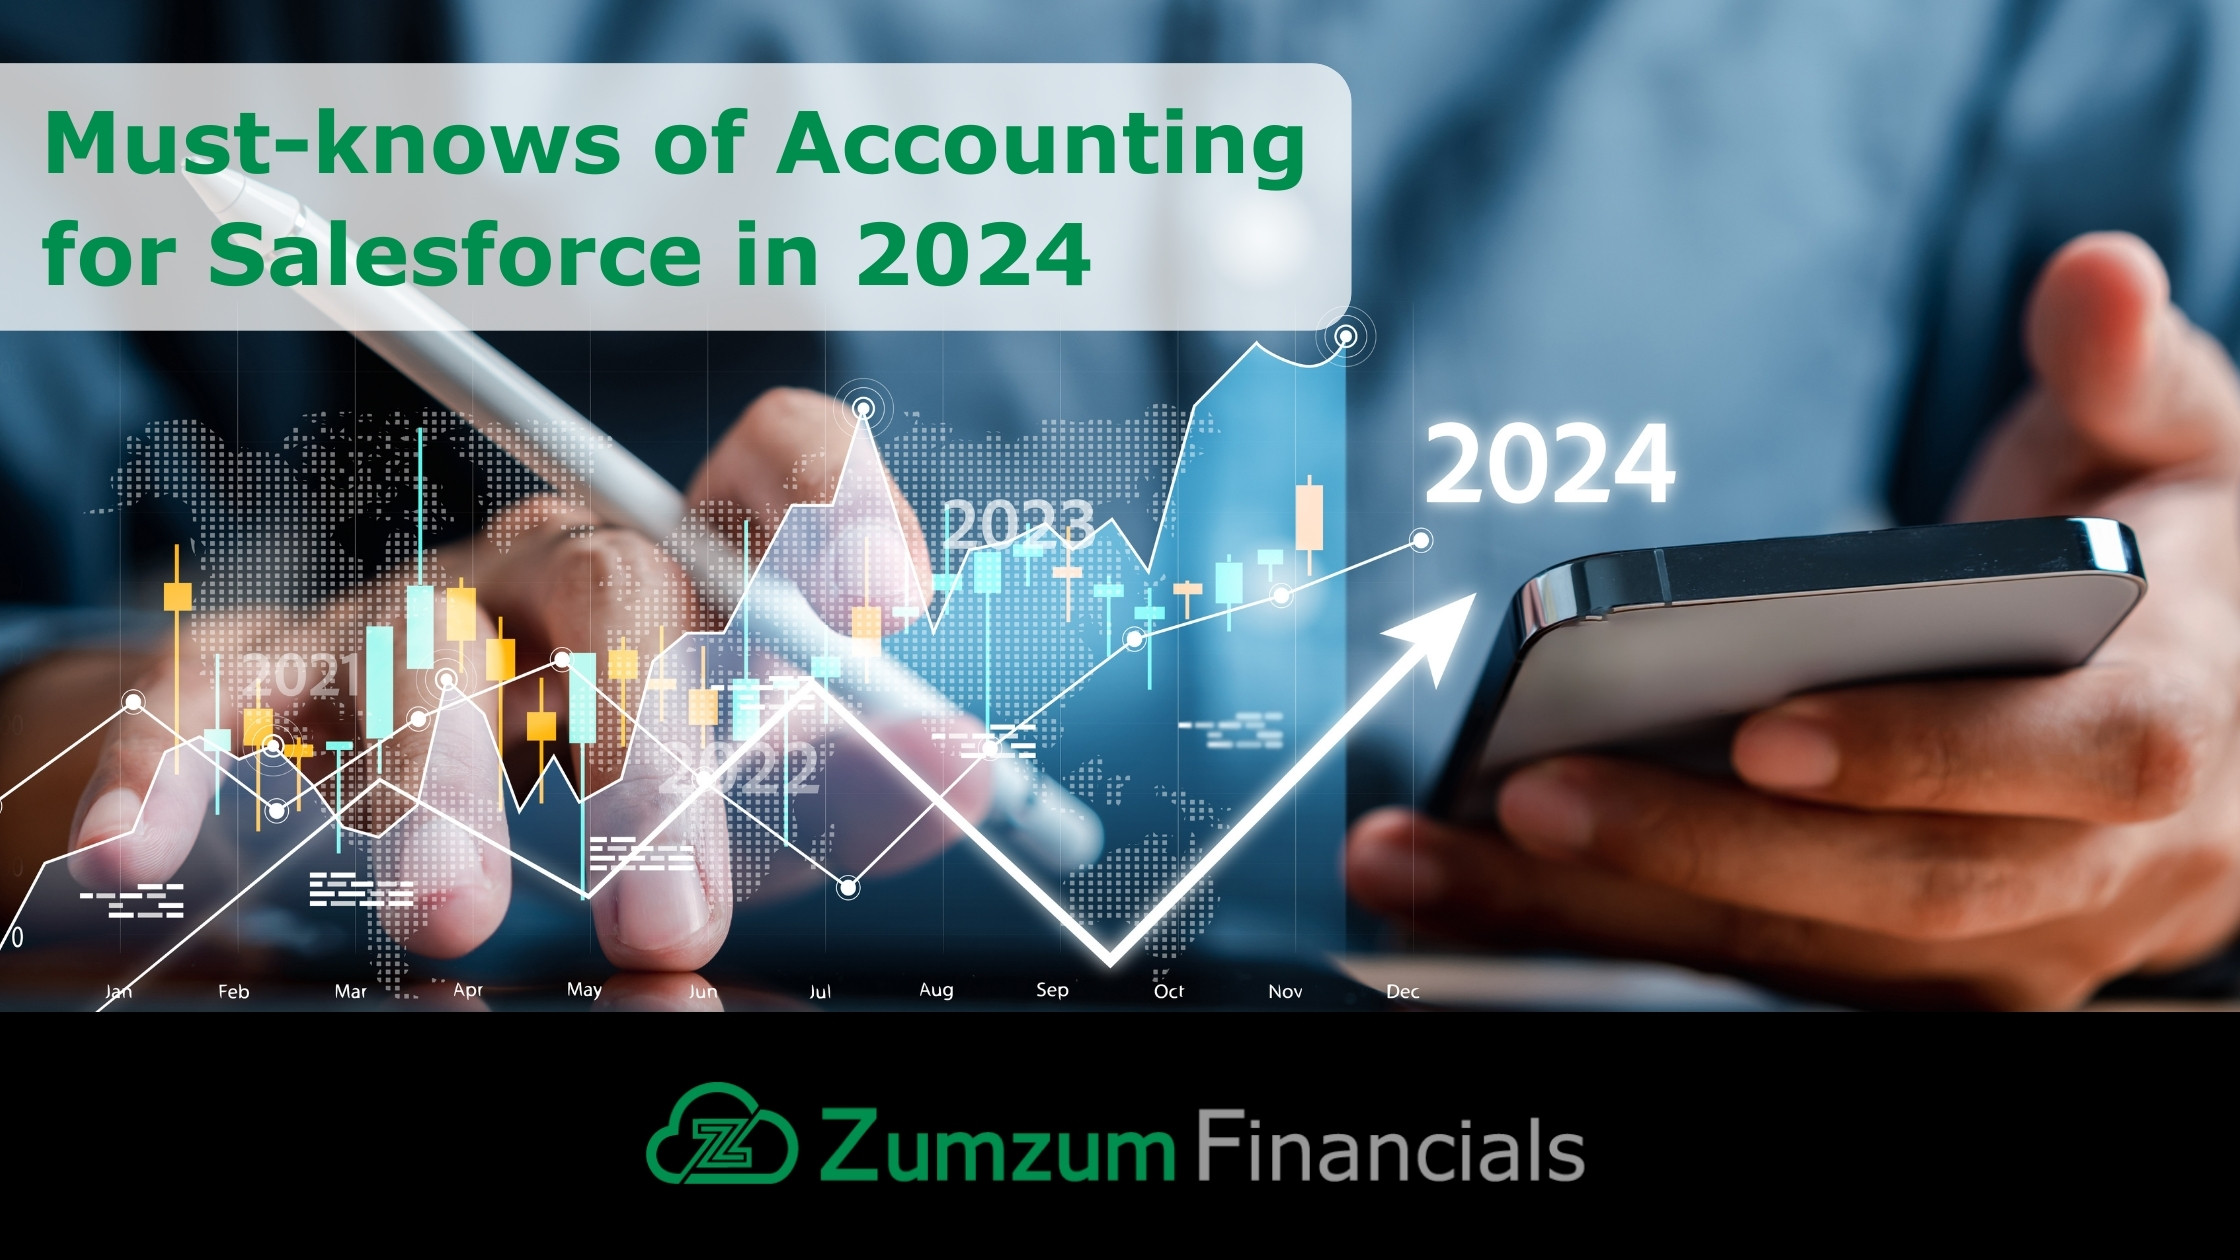 Must-knows of Accounting for Salesforce in 2024